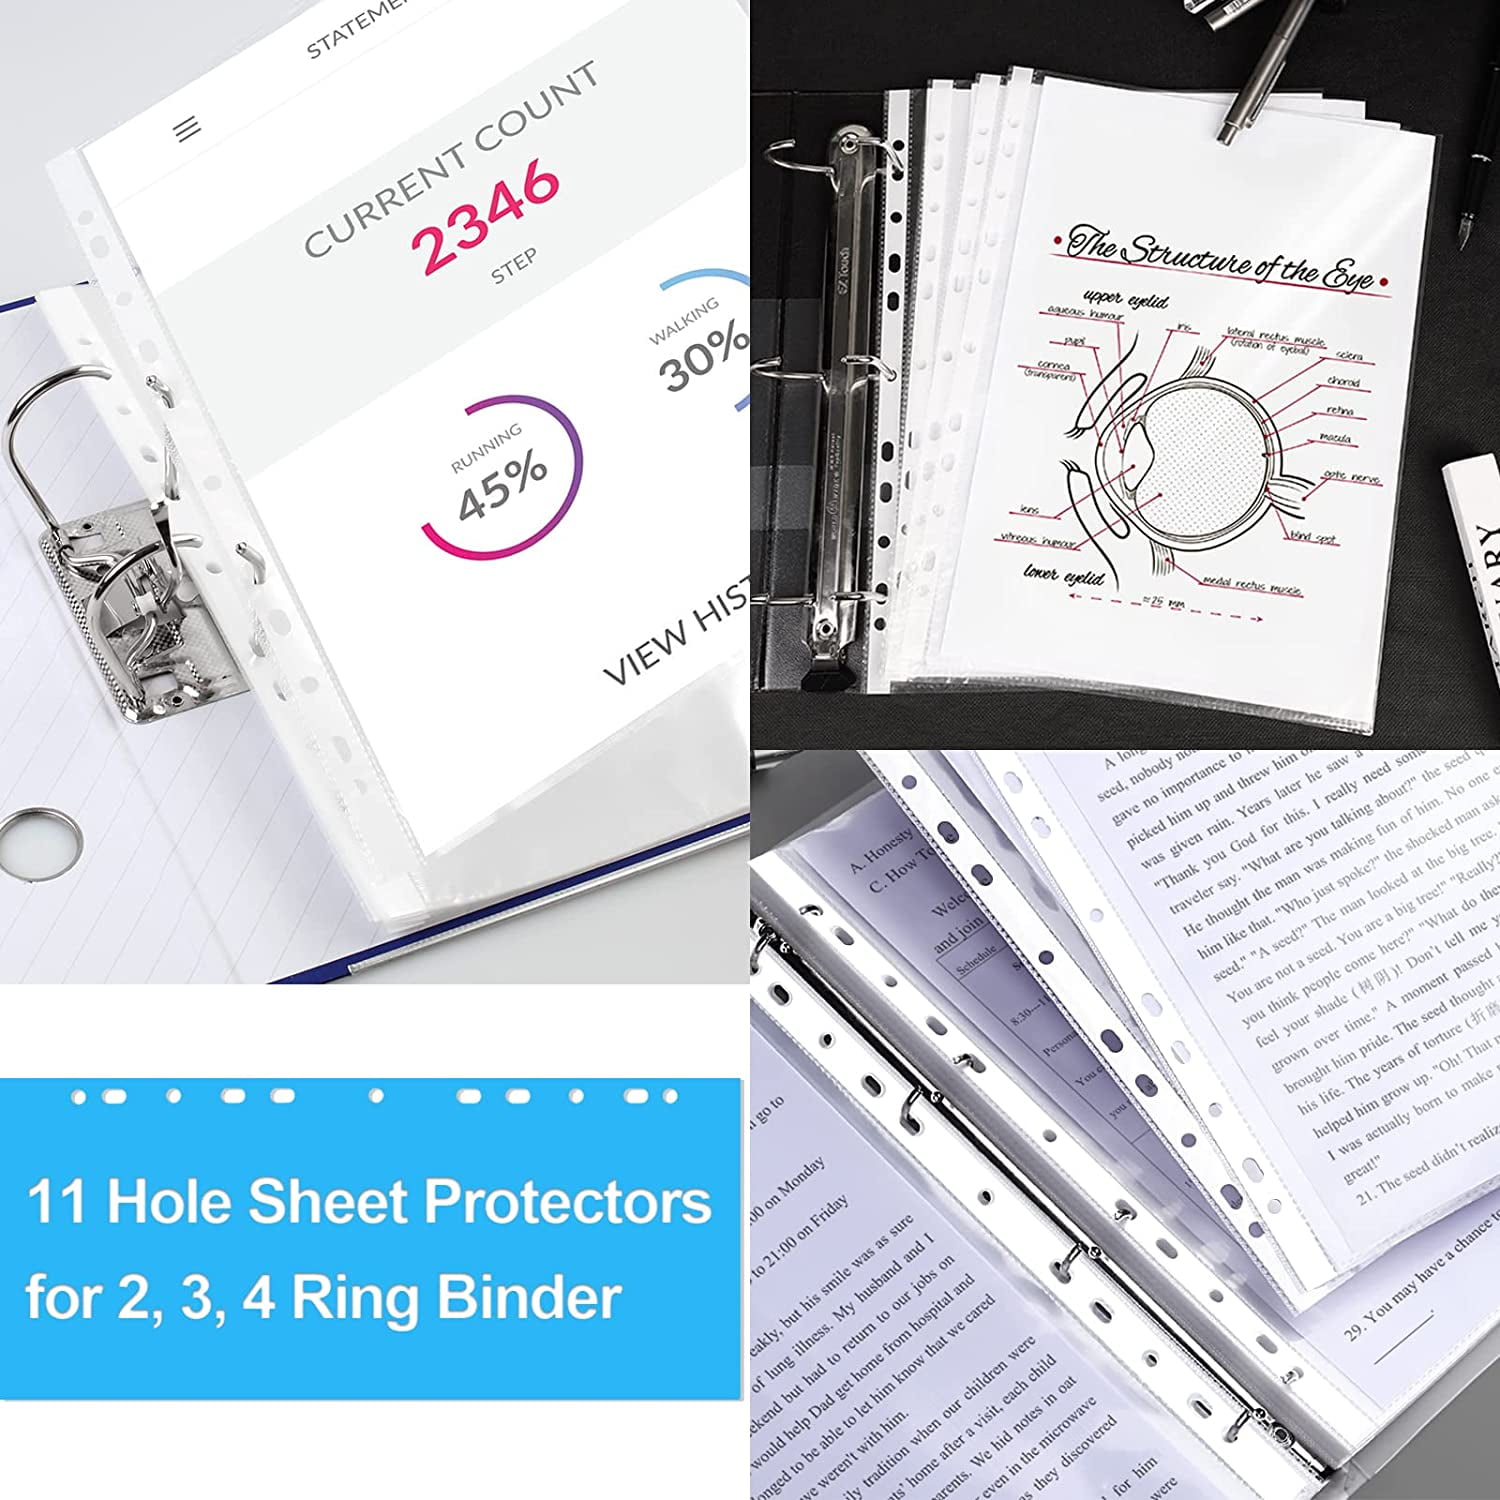  6x8 Page Protectors - Panoramic - Four 3x4 Two 3x4 Pockets  - 20 Pack